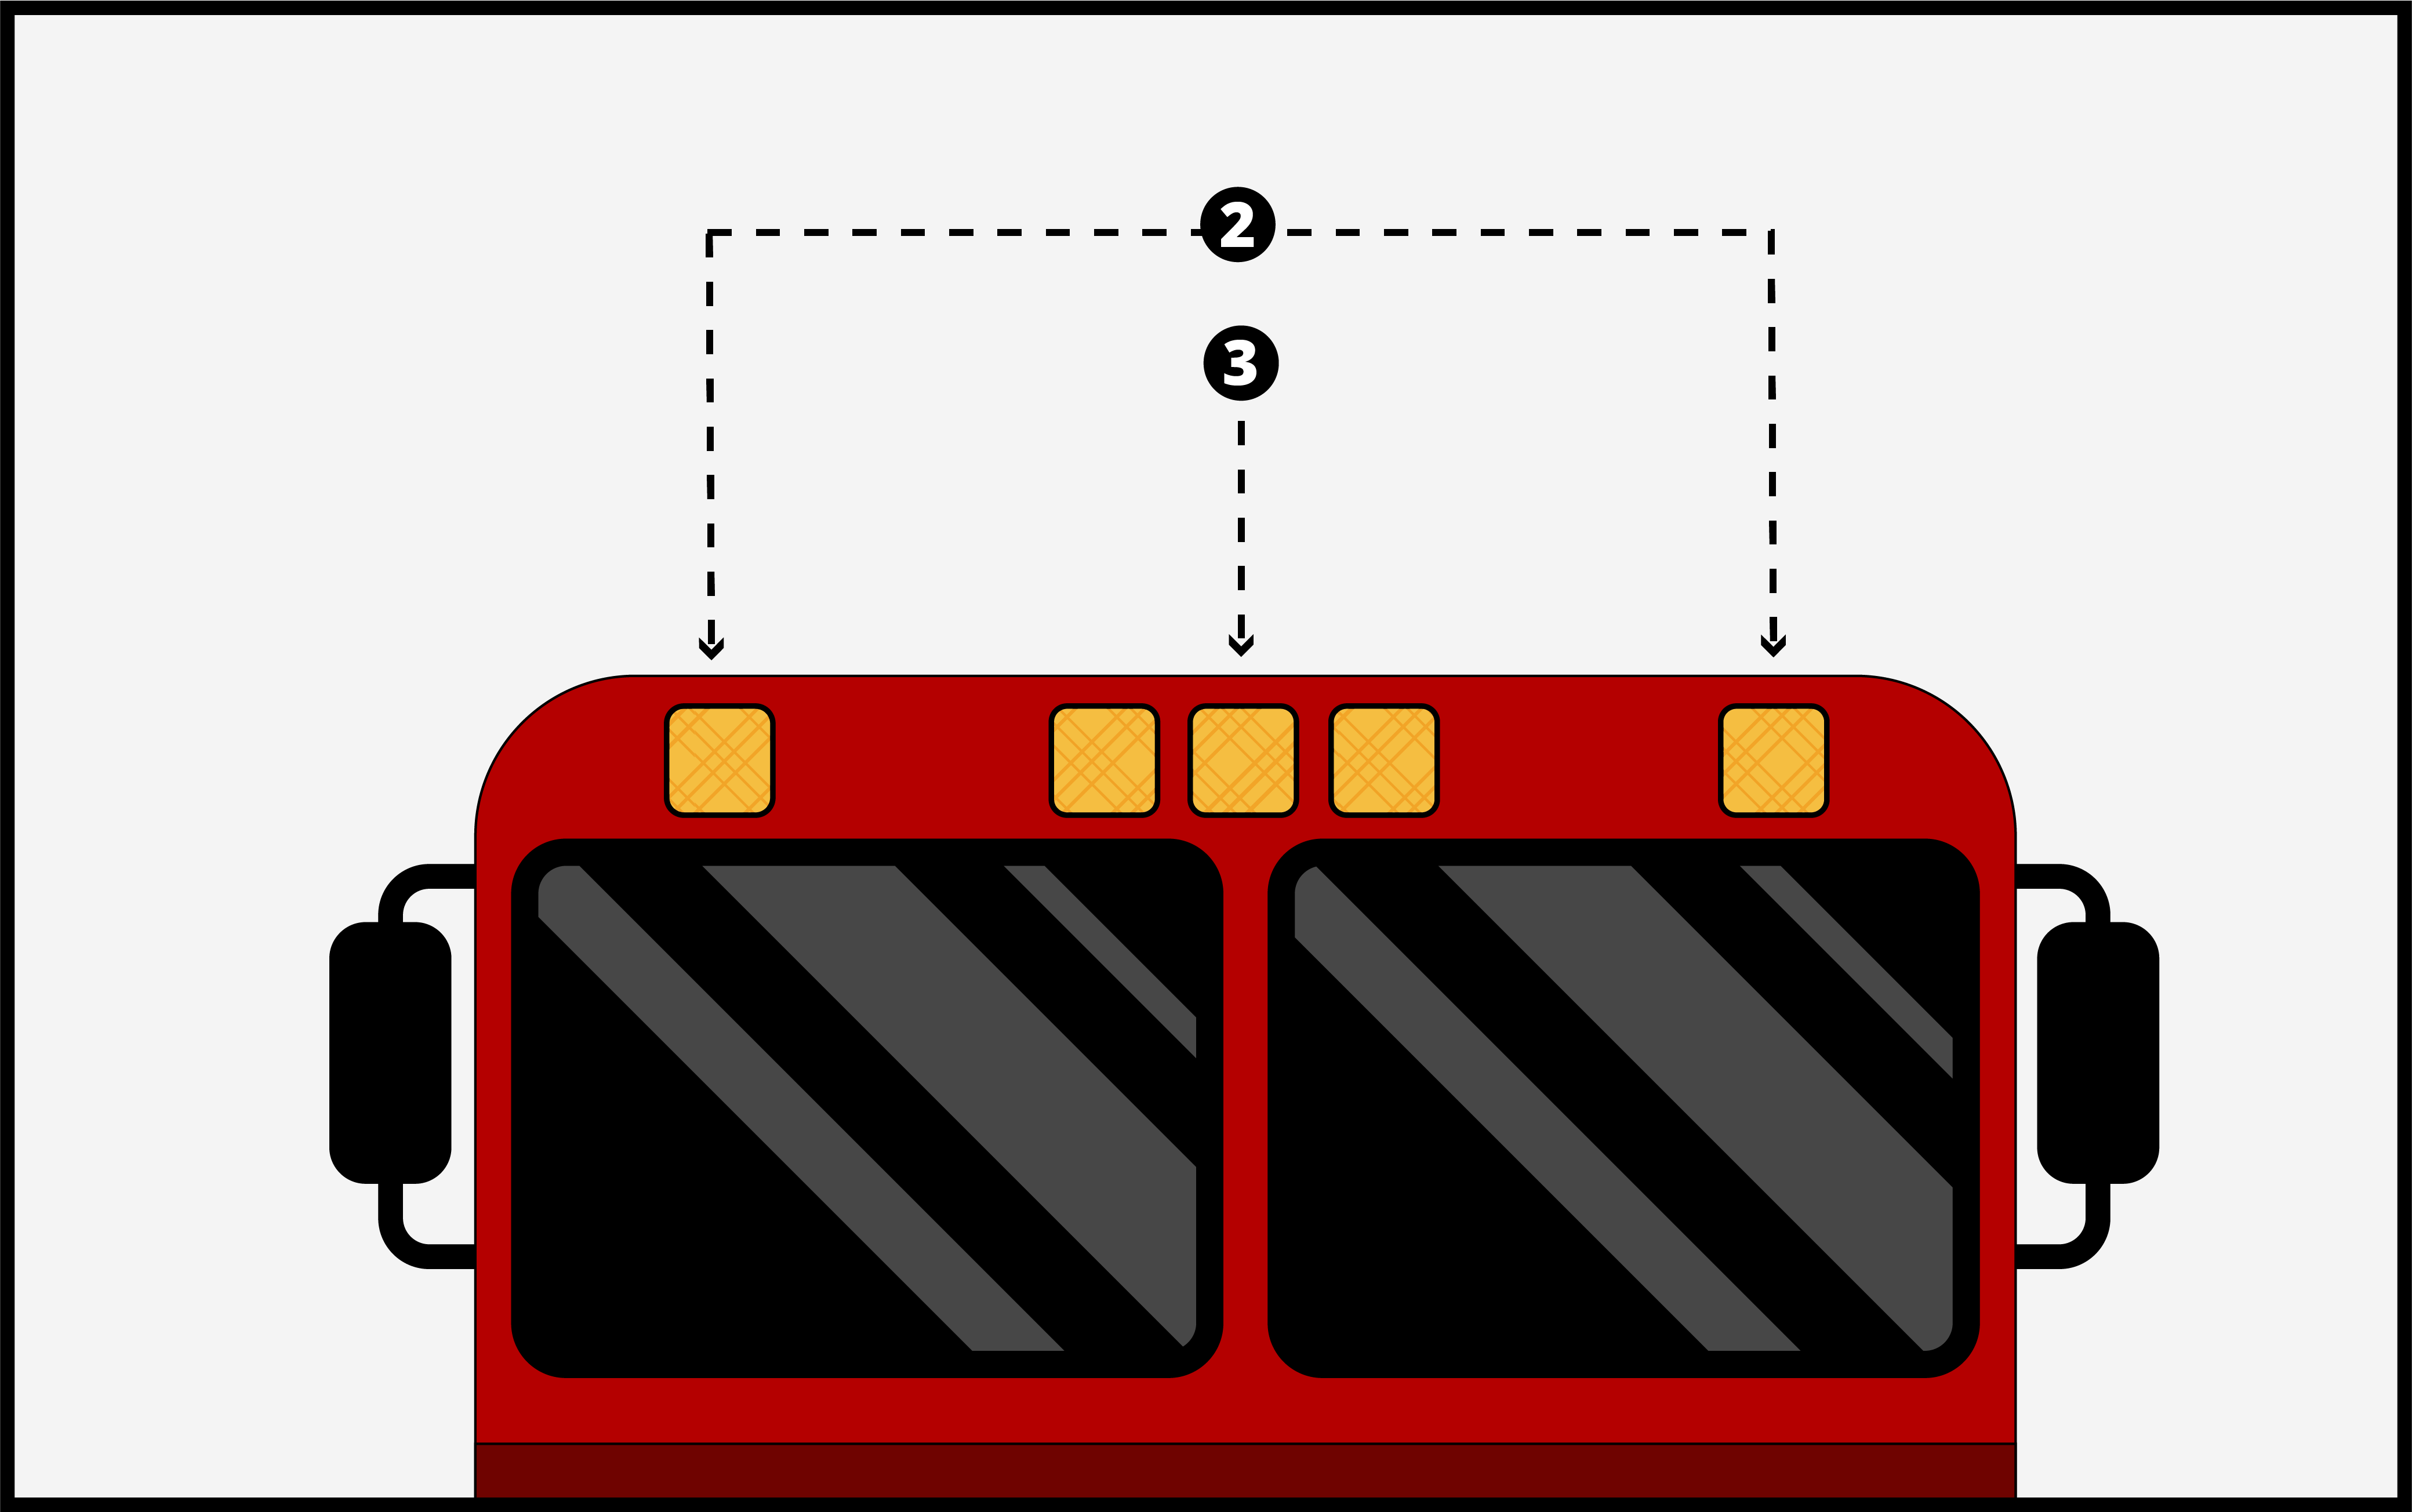 diagram of marker lights on fire truck cab